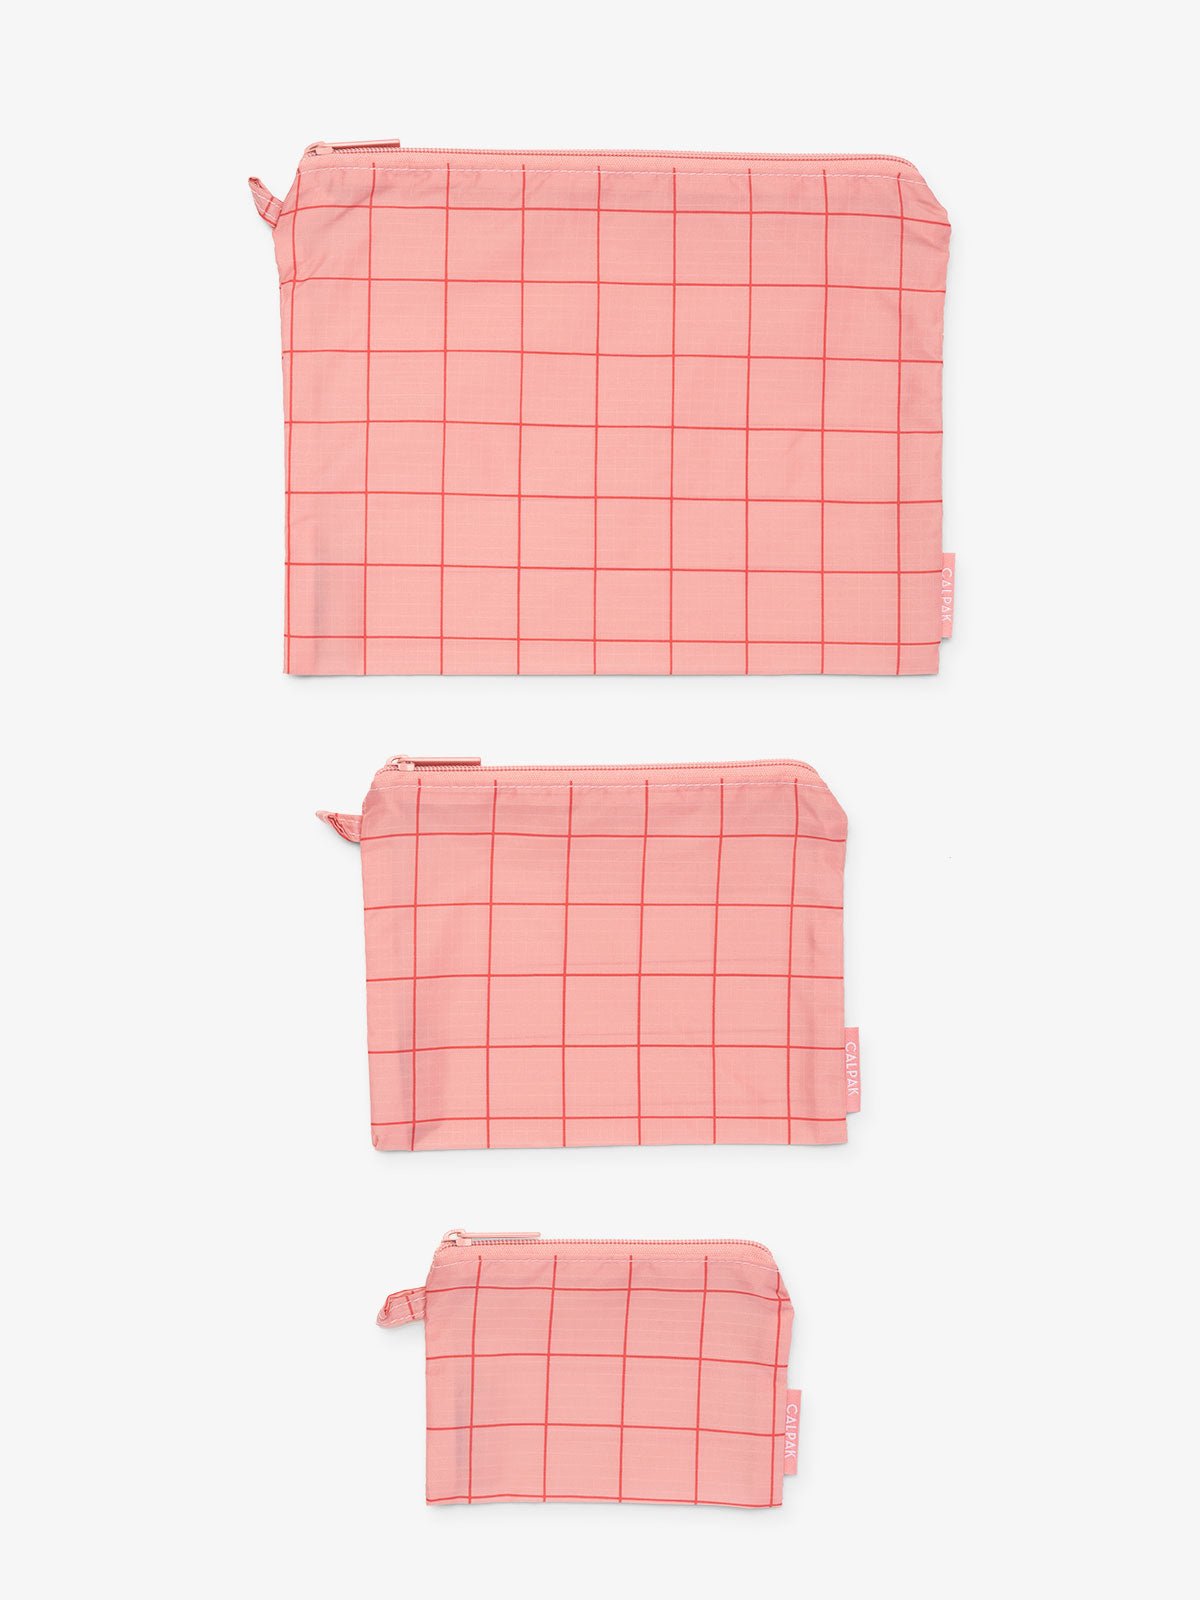 CALPAK Compakt water resistant zippered pouch set for organization in pink grid